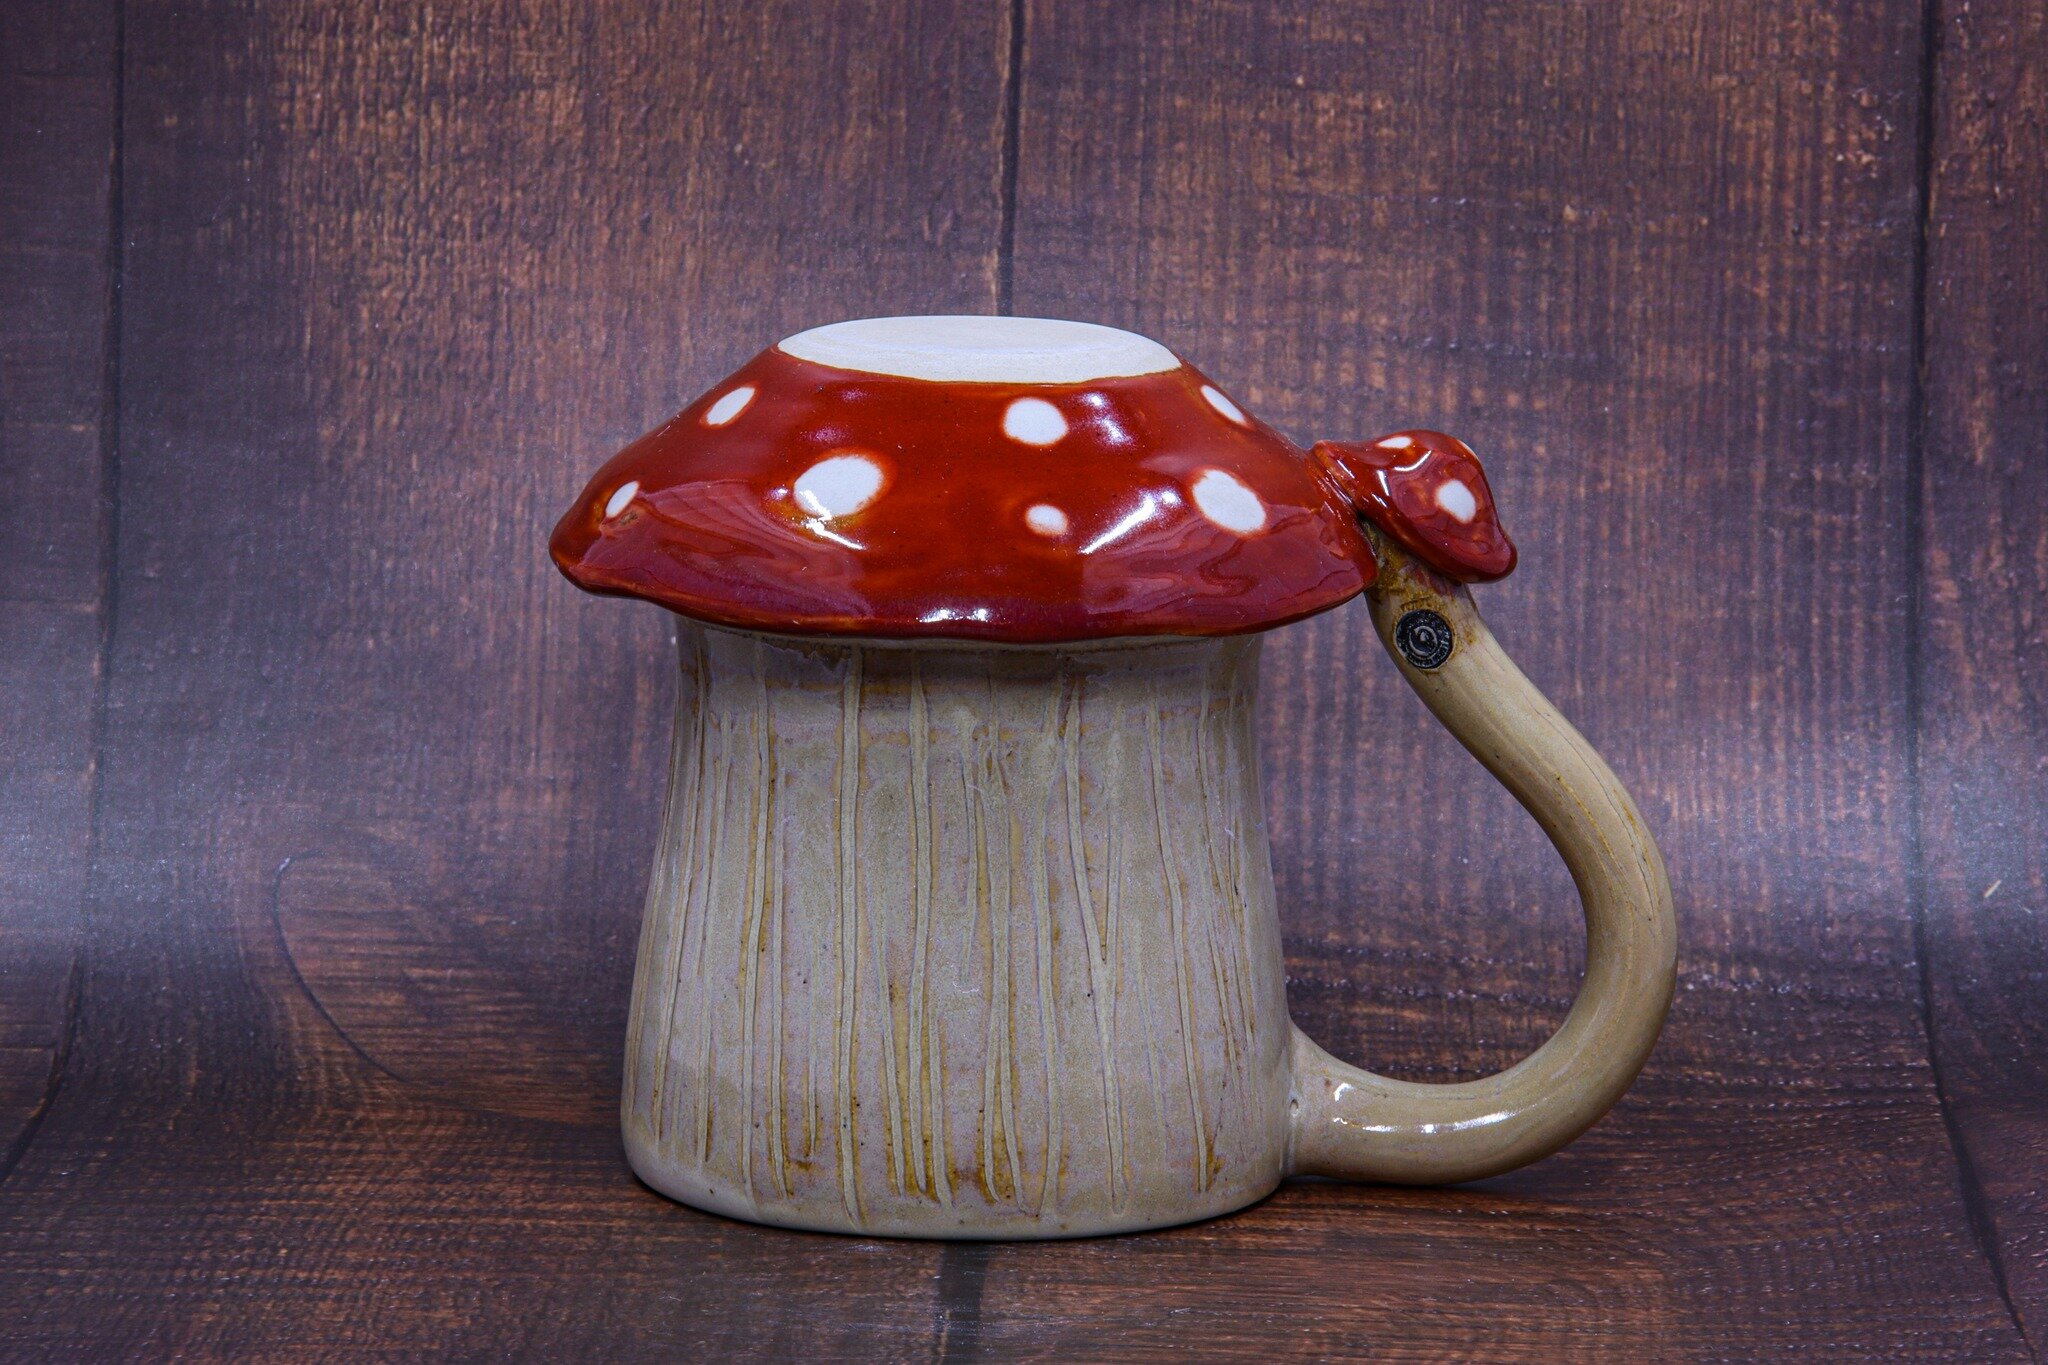 This is one of several mushroom mugs made for a custom order!

I love coming up with new and interesting ideas to make something special and one-of-a-kind! Mug one way and mushroom d&eacute;cor when it's upside-down!

Let me know if you want to see t